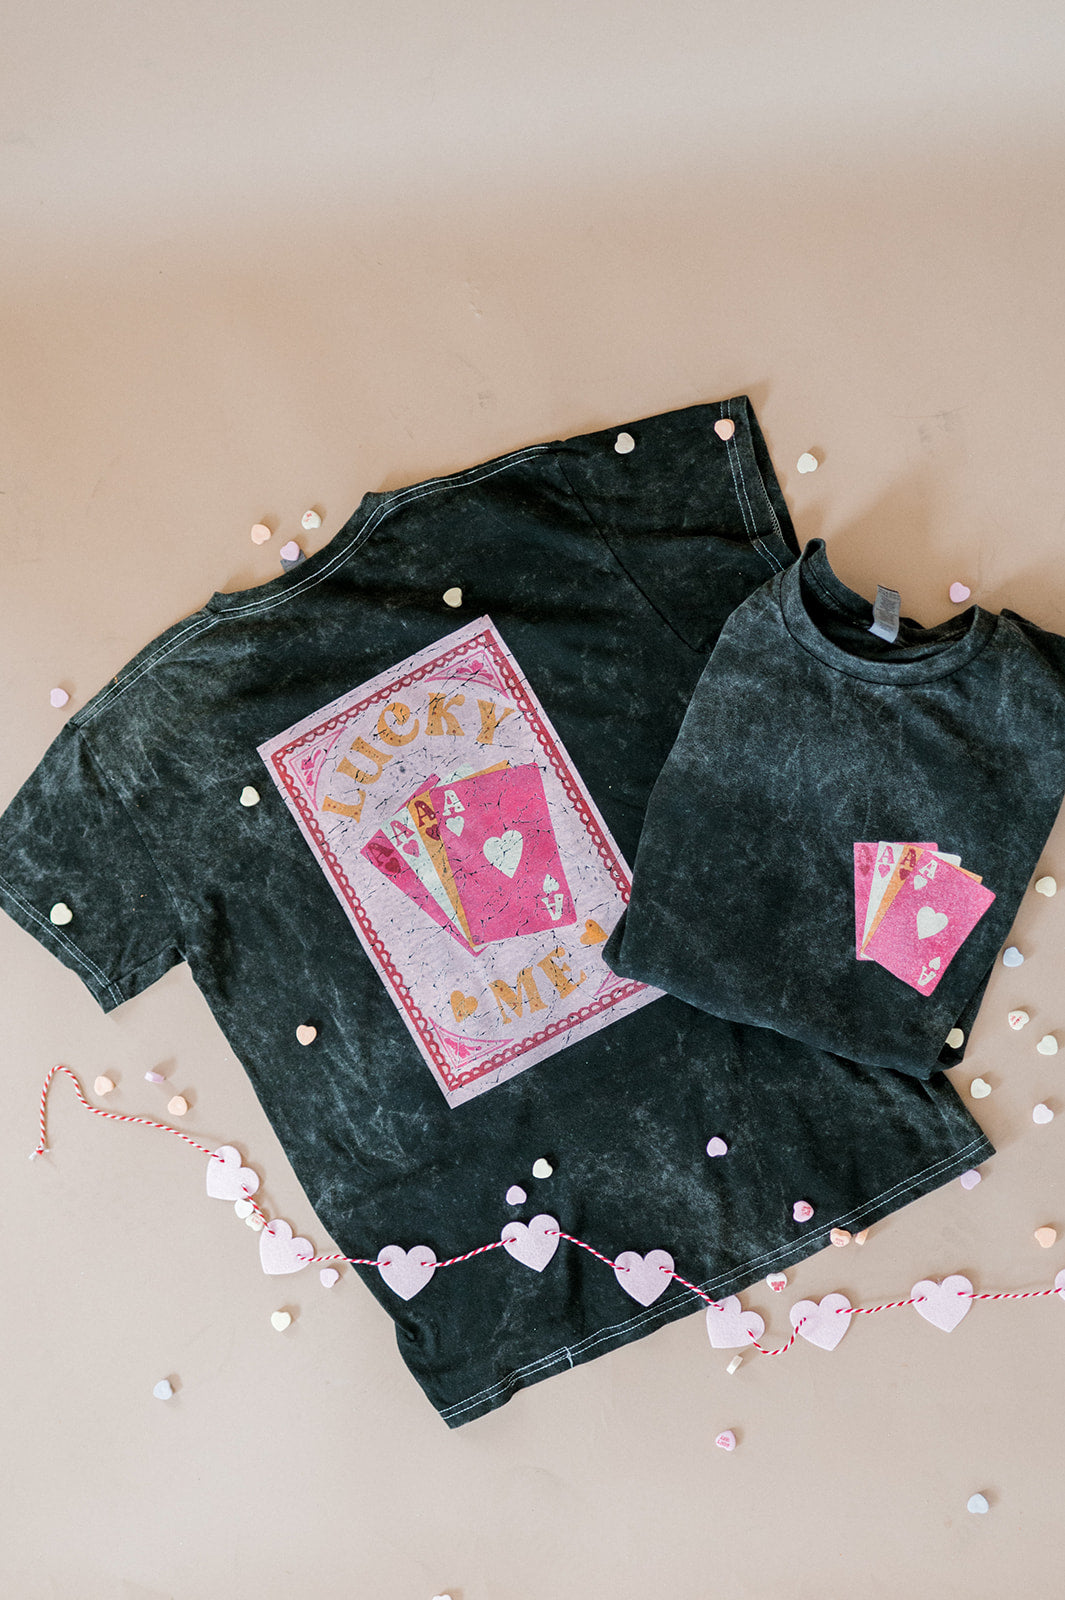 Lucky Me | Tee | Adult-Sister Shirts-Sister Shirts, Cute & Custom Tees for Mama & Littles in Trussville, Alabama.